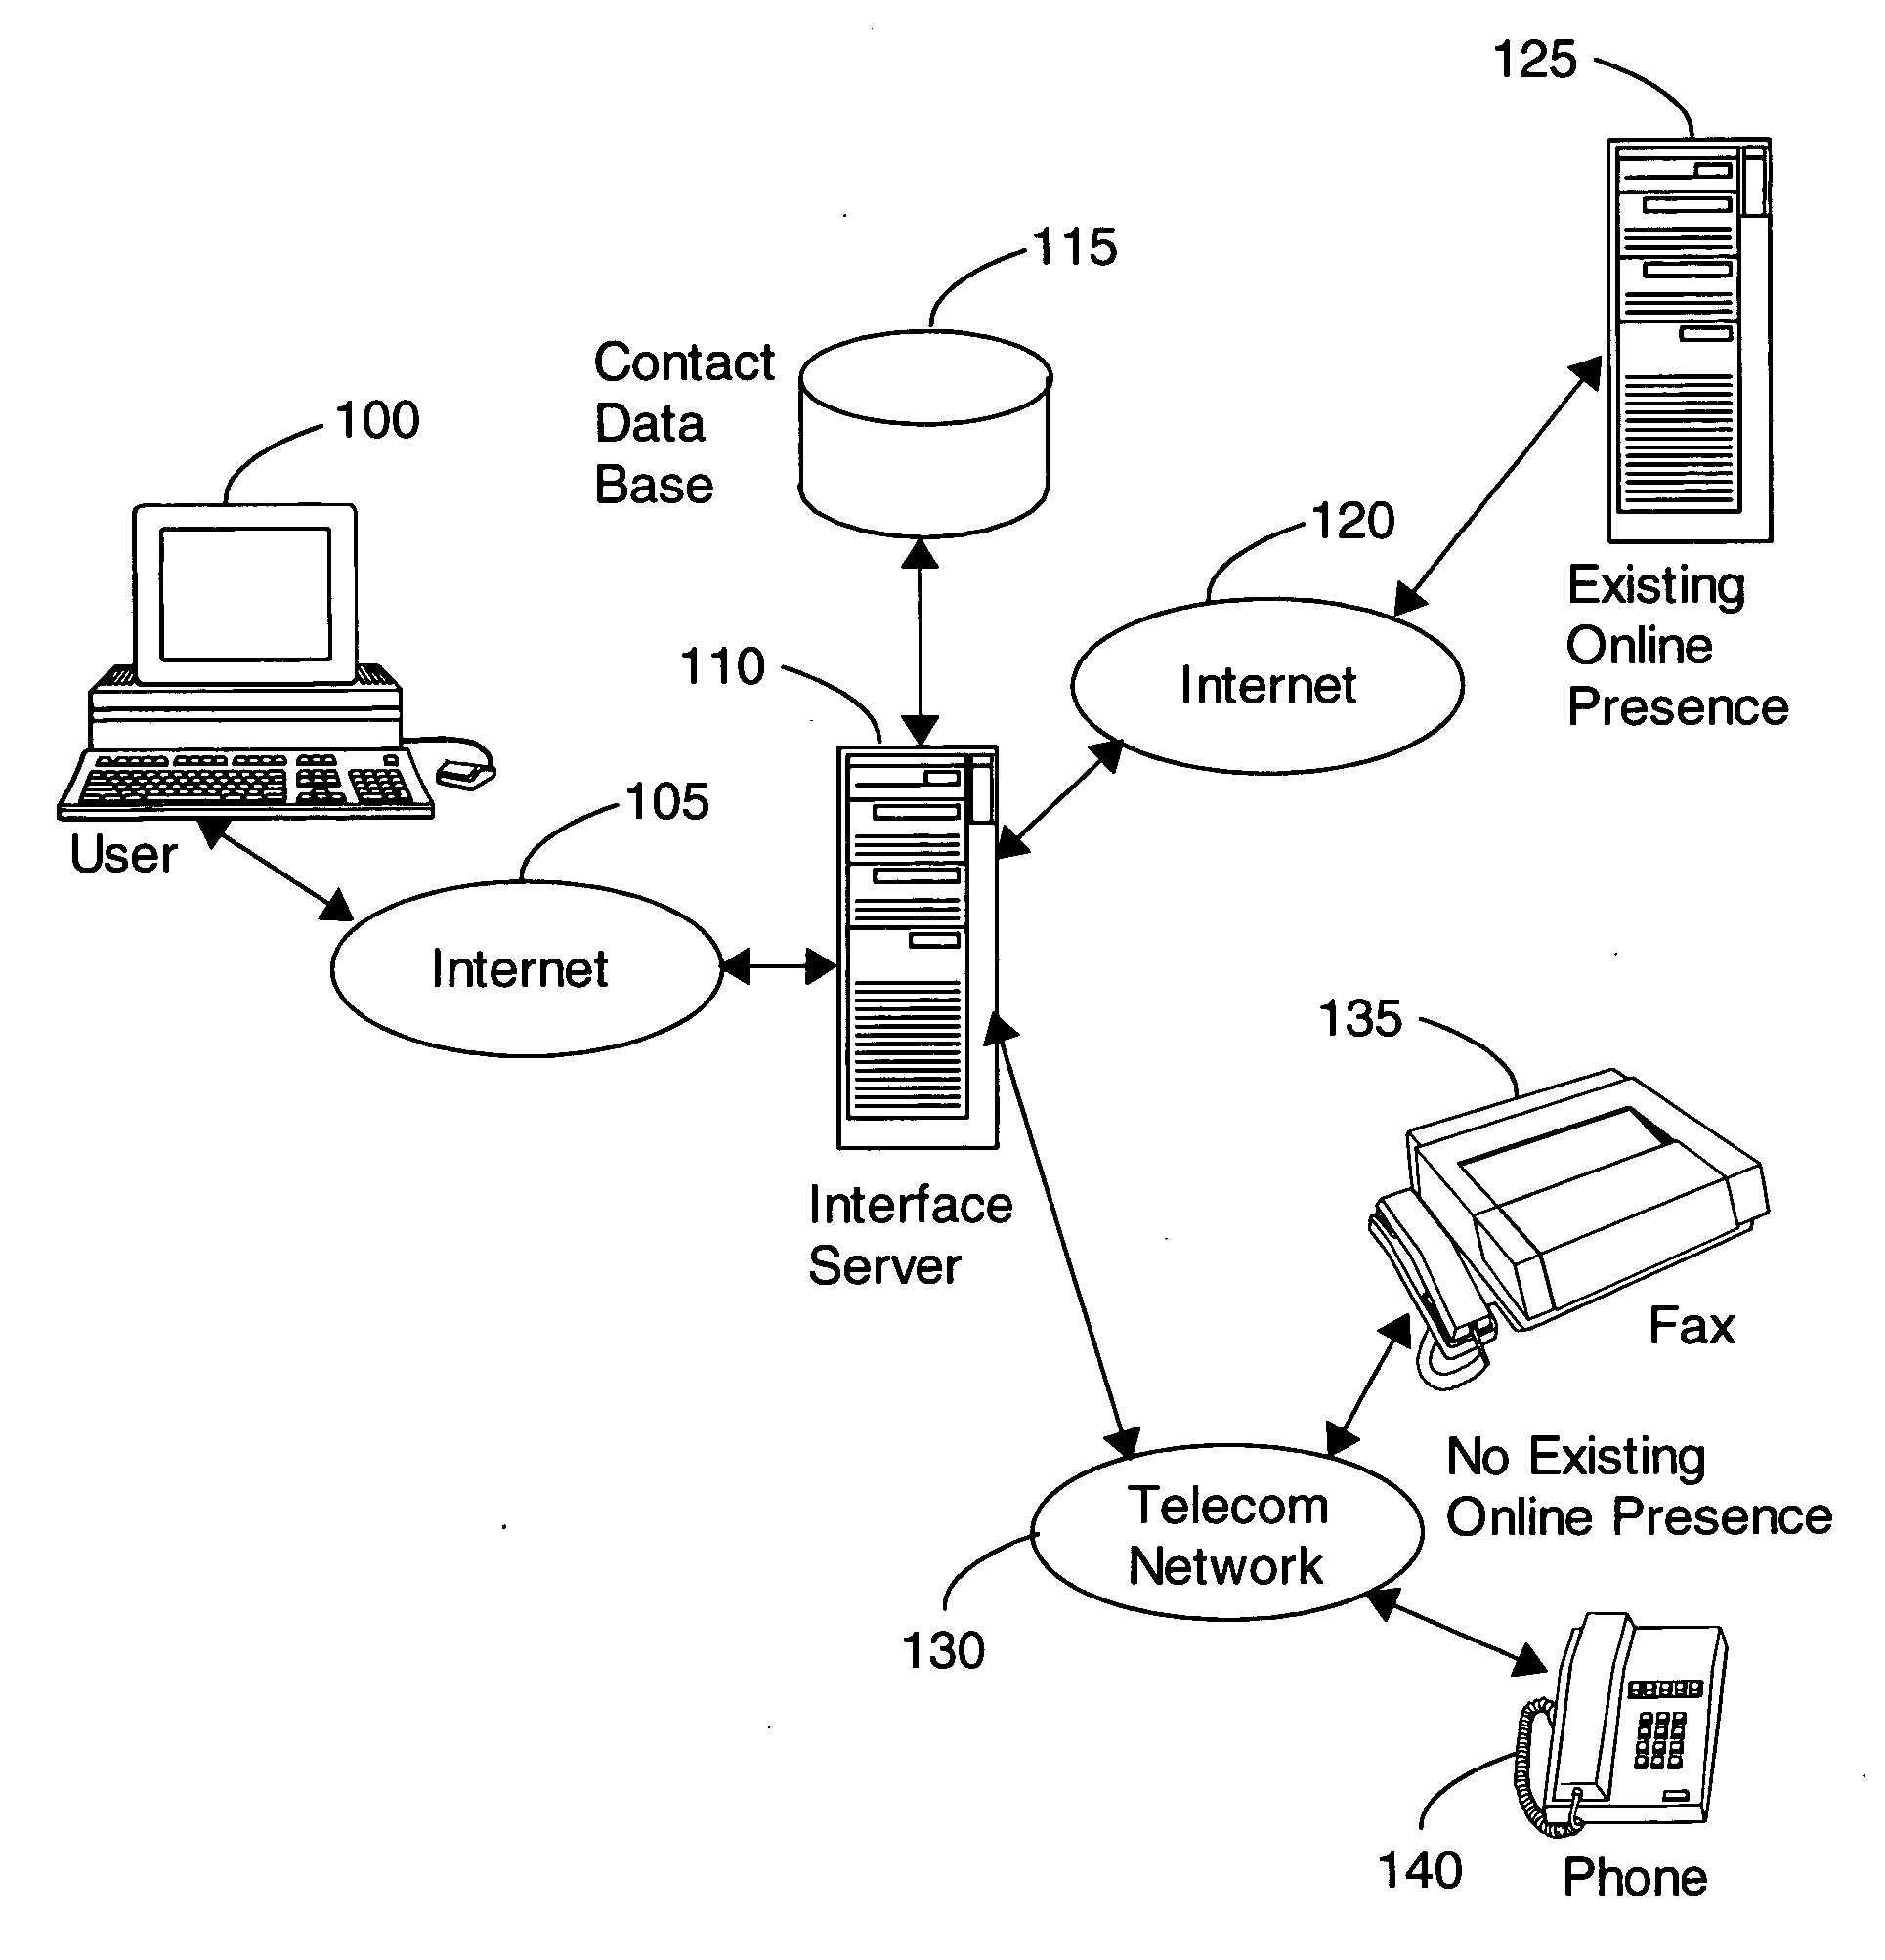 Method, apparatus and business system for online communications with online and offline recipients